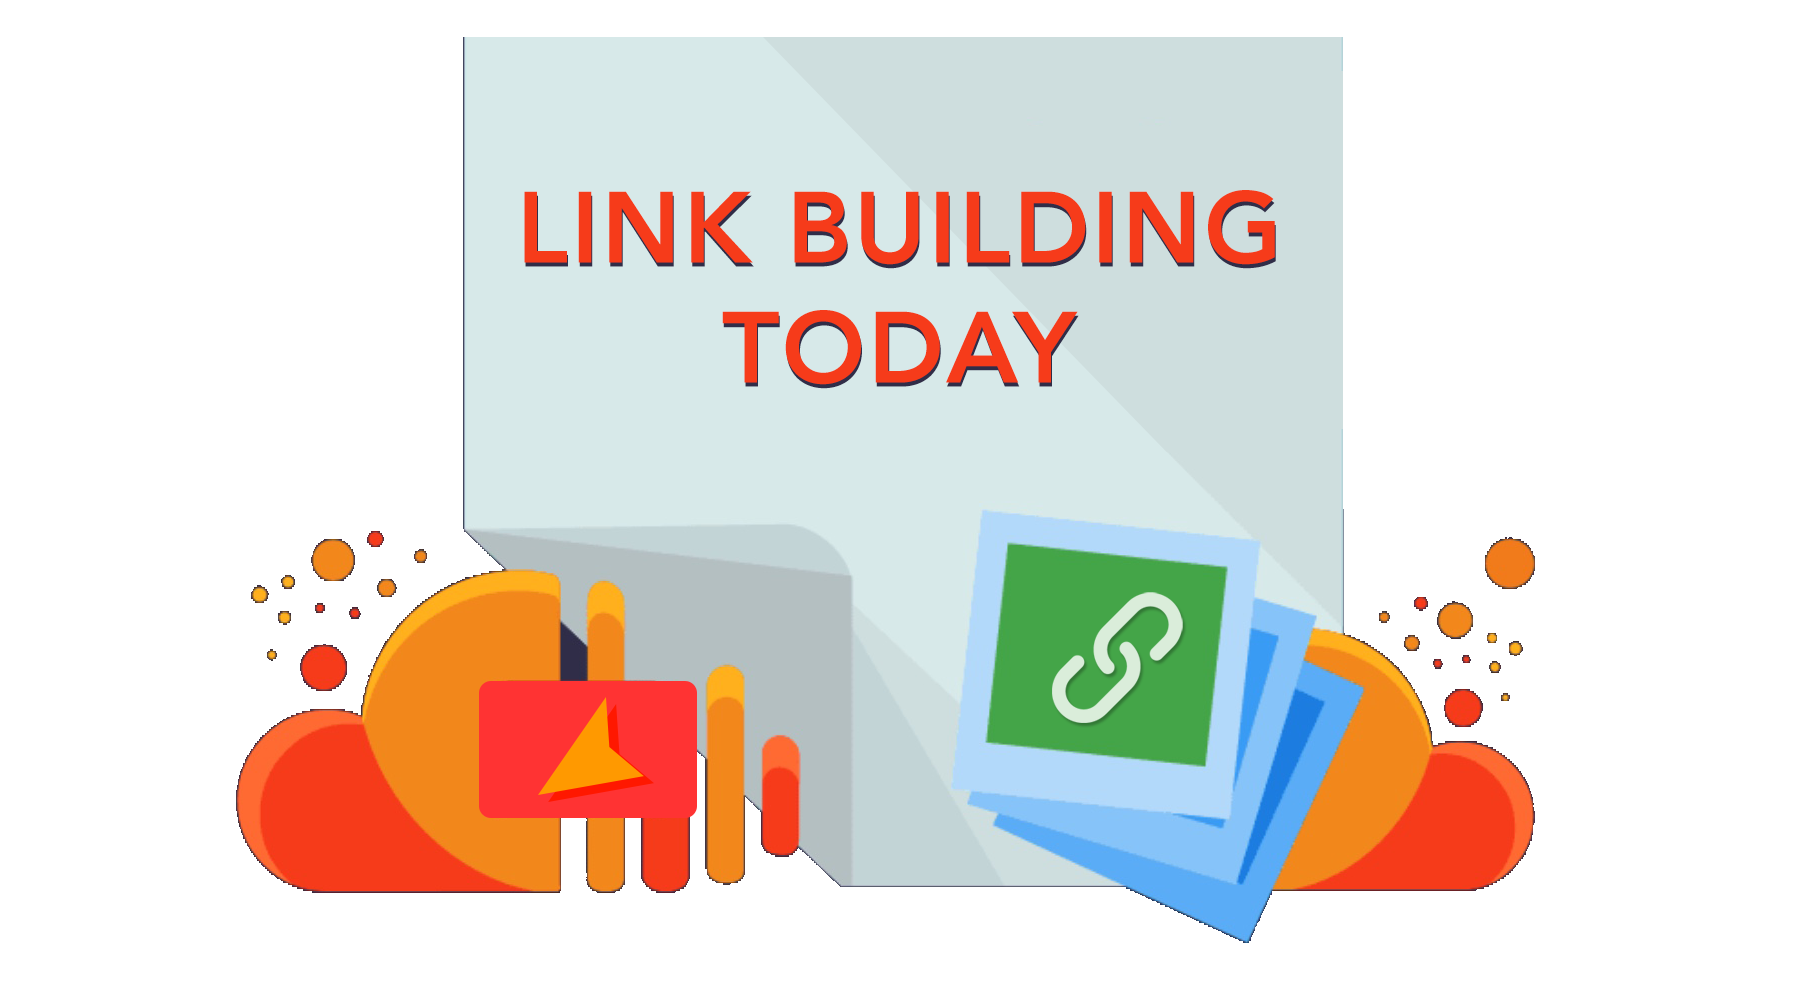 Link Building Today